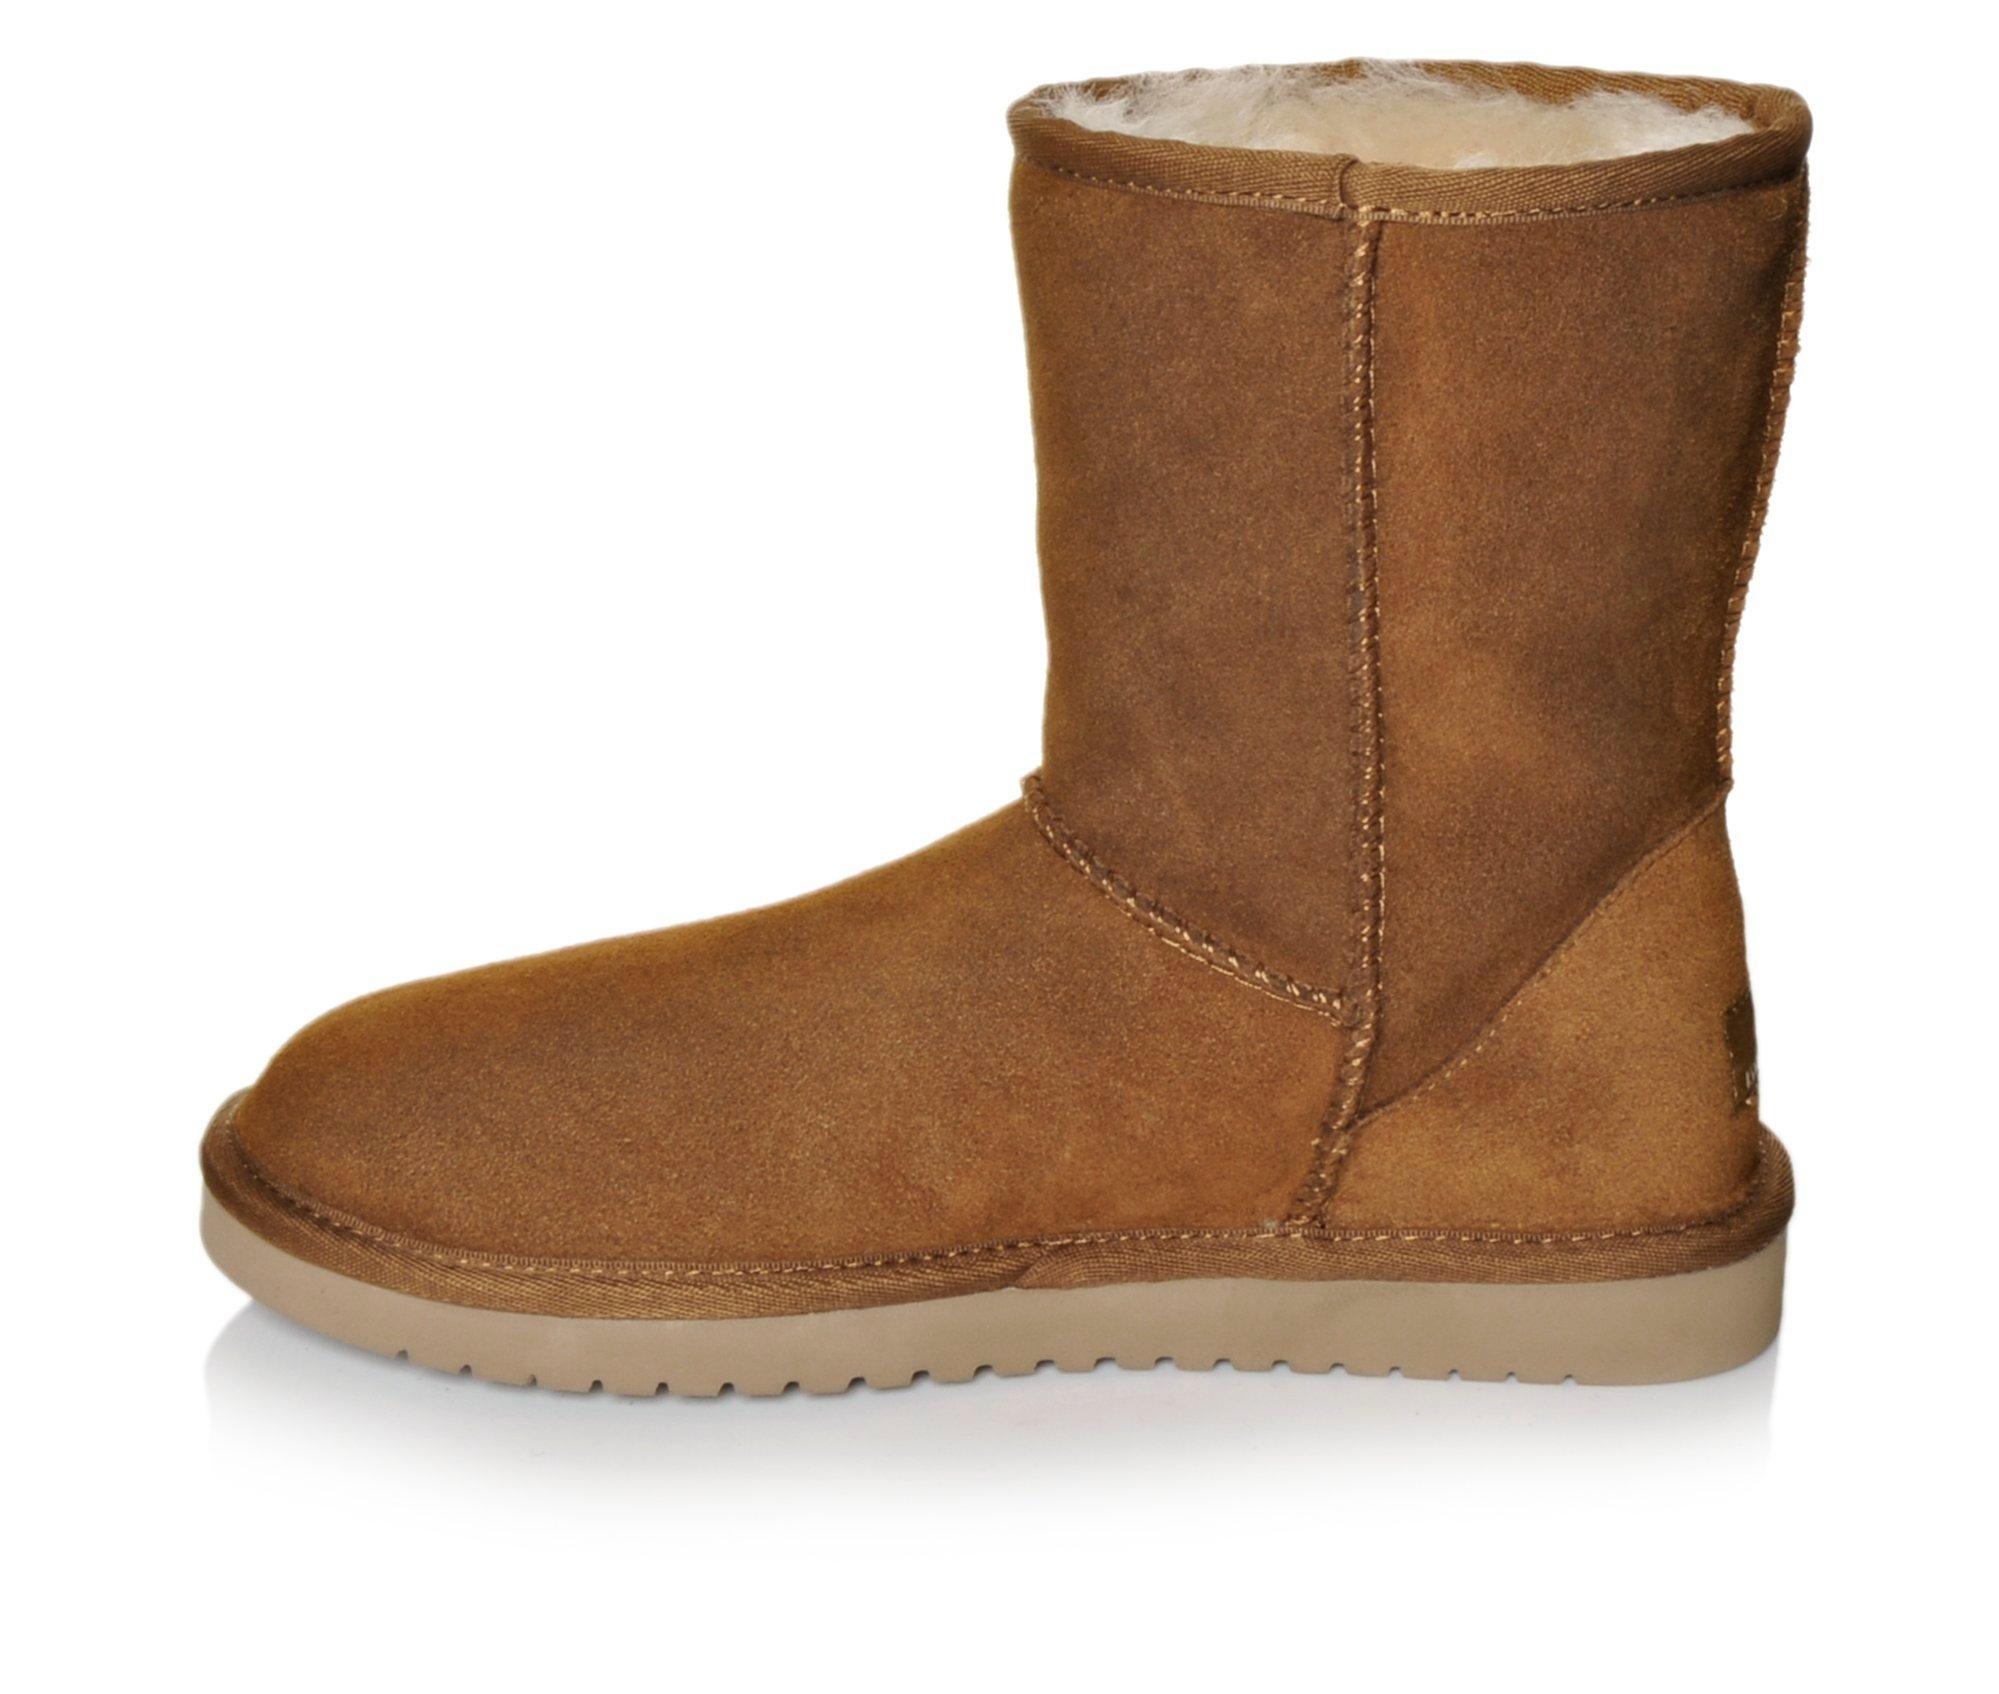 Women's by UGG Classic Short Winter Boots